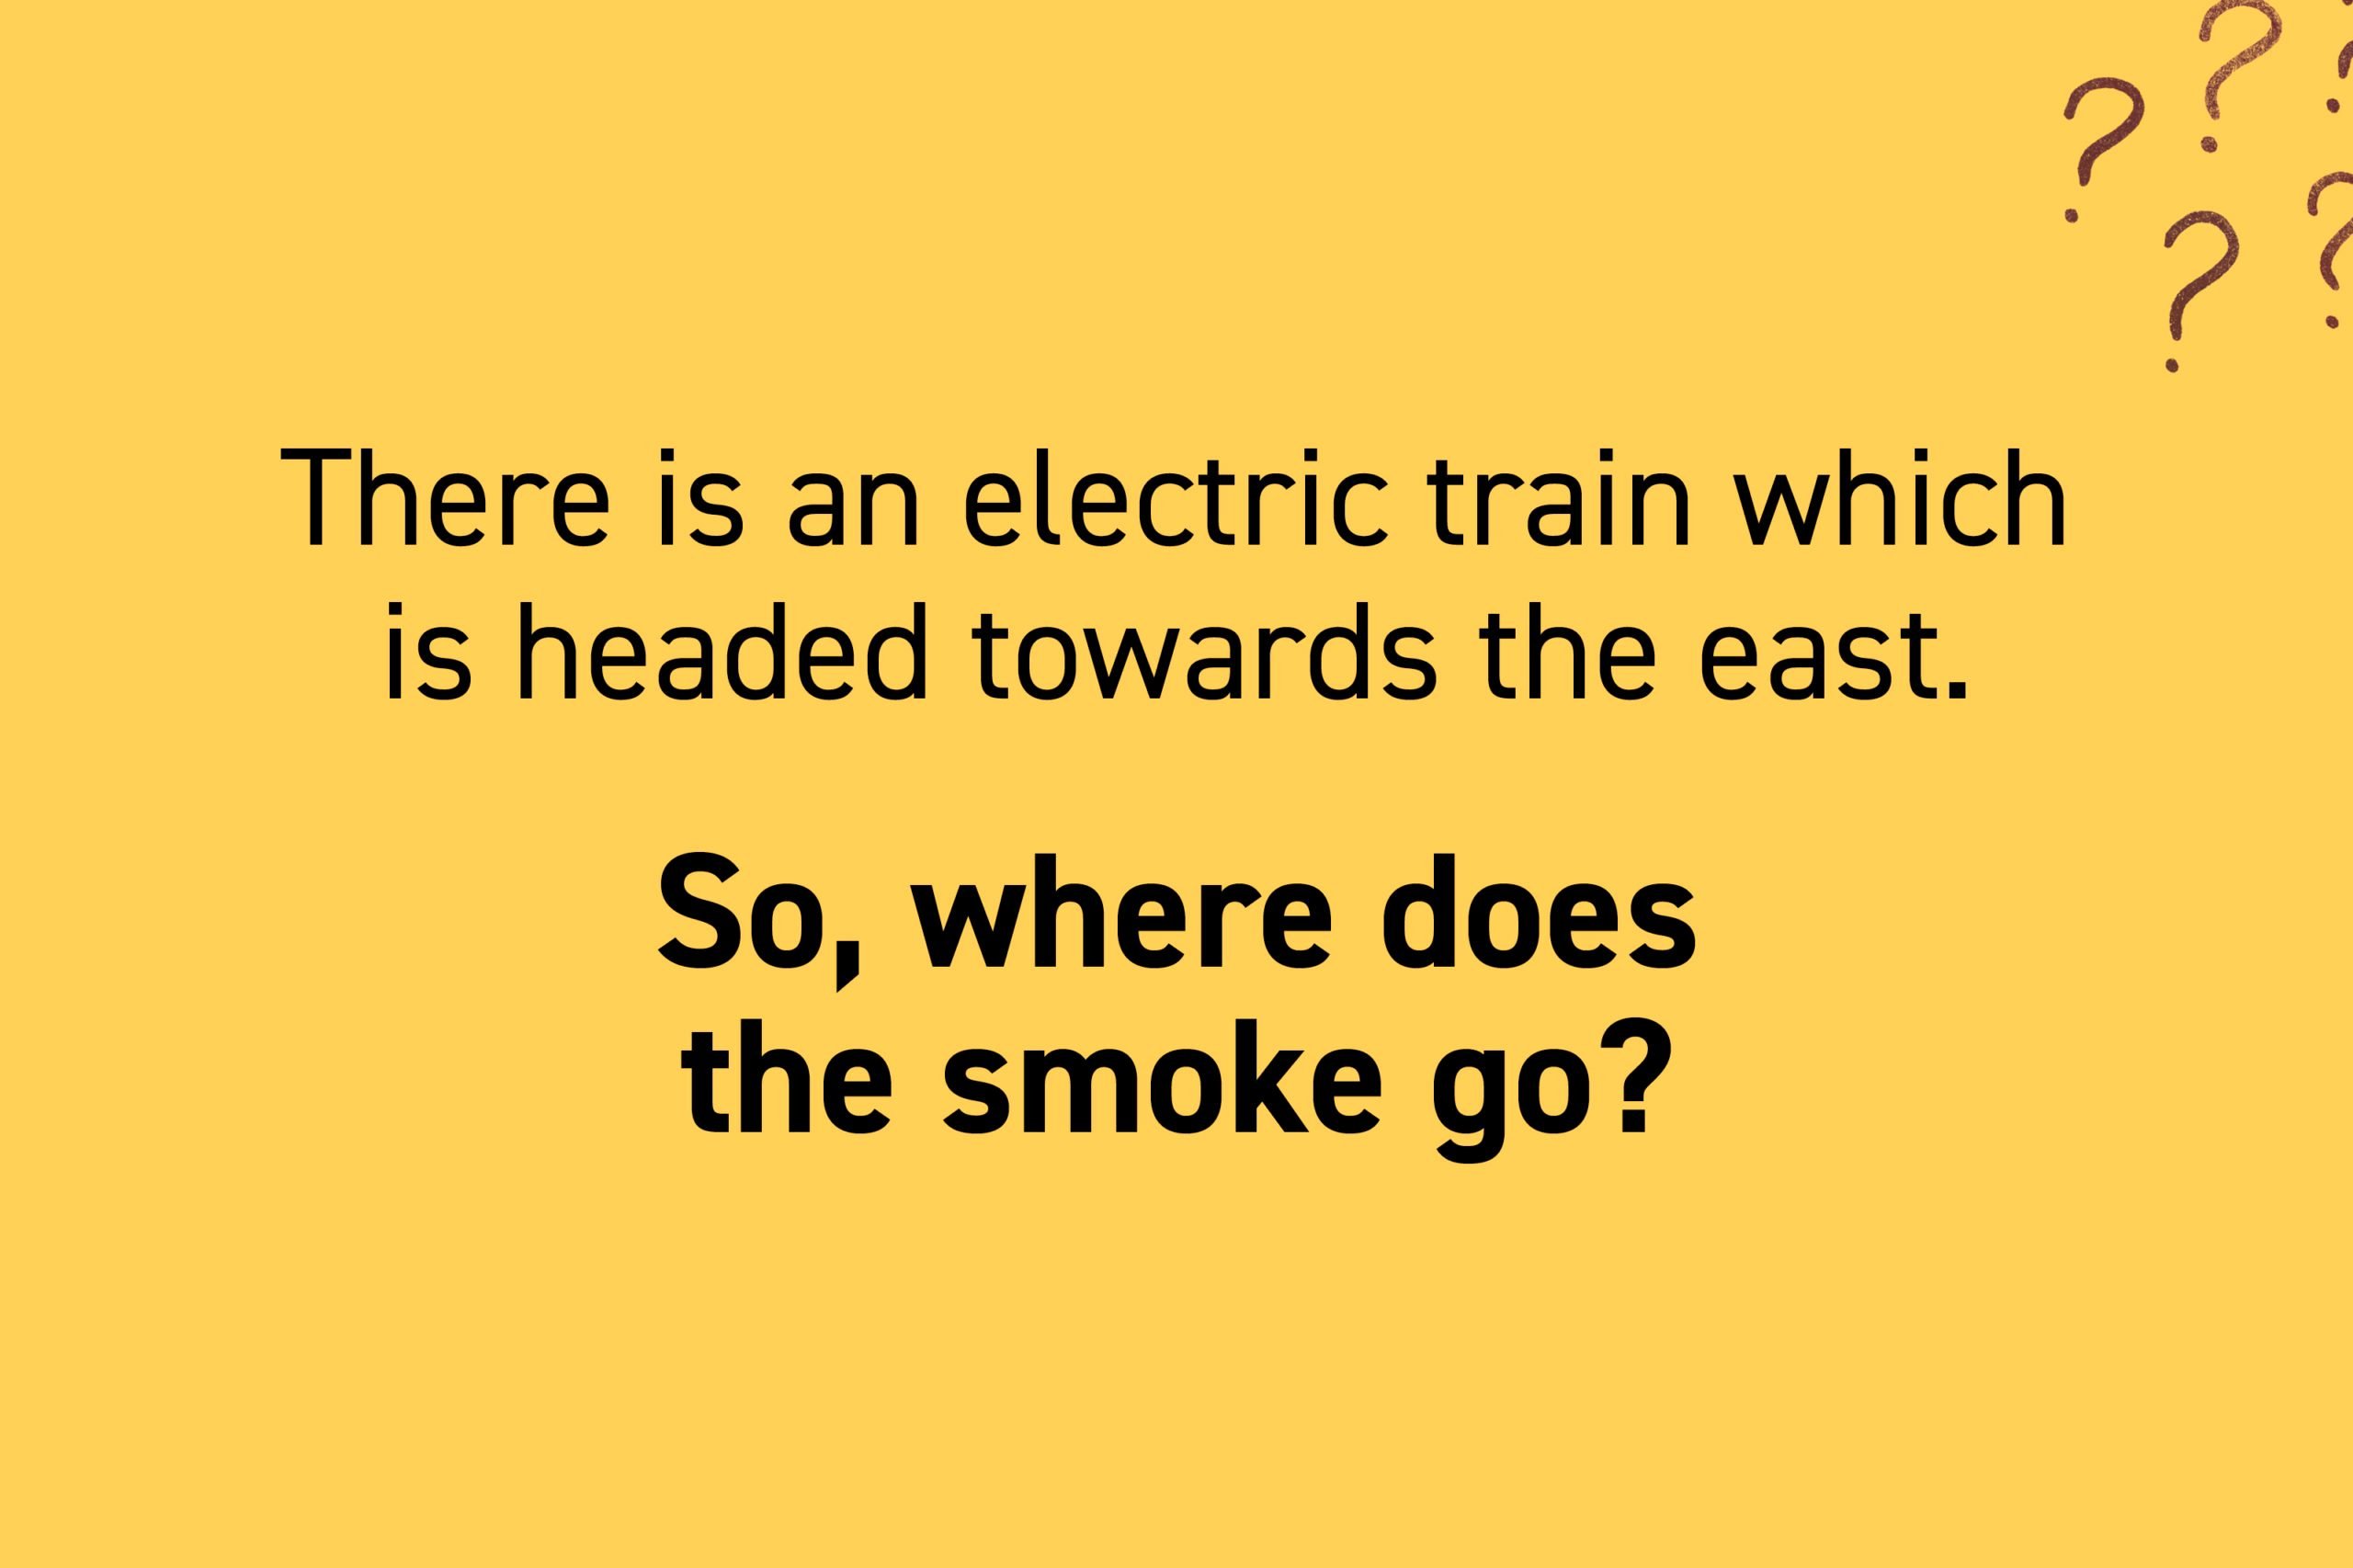 There is an electric train which is headed towards the east. So, where does the smoke go?